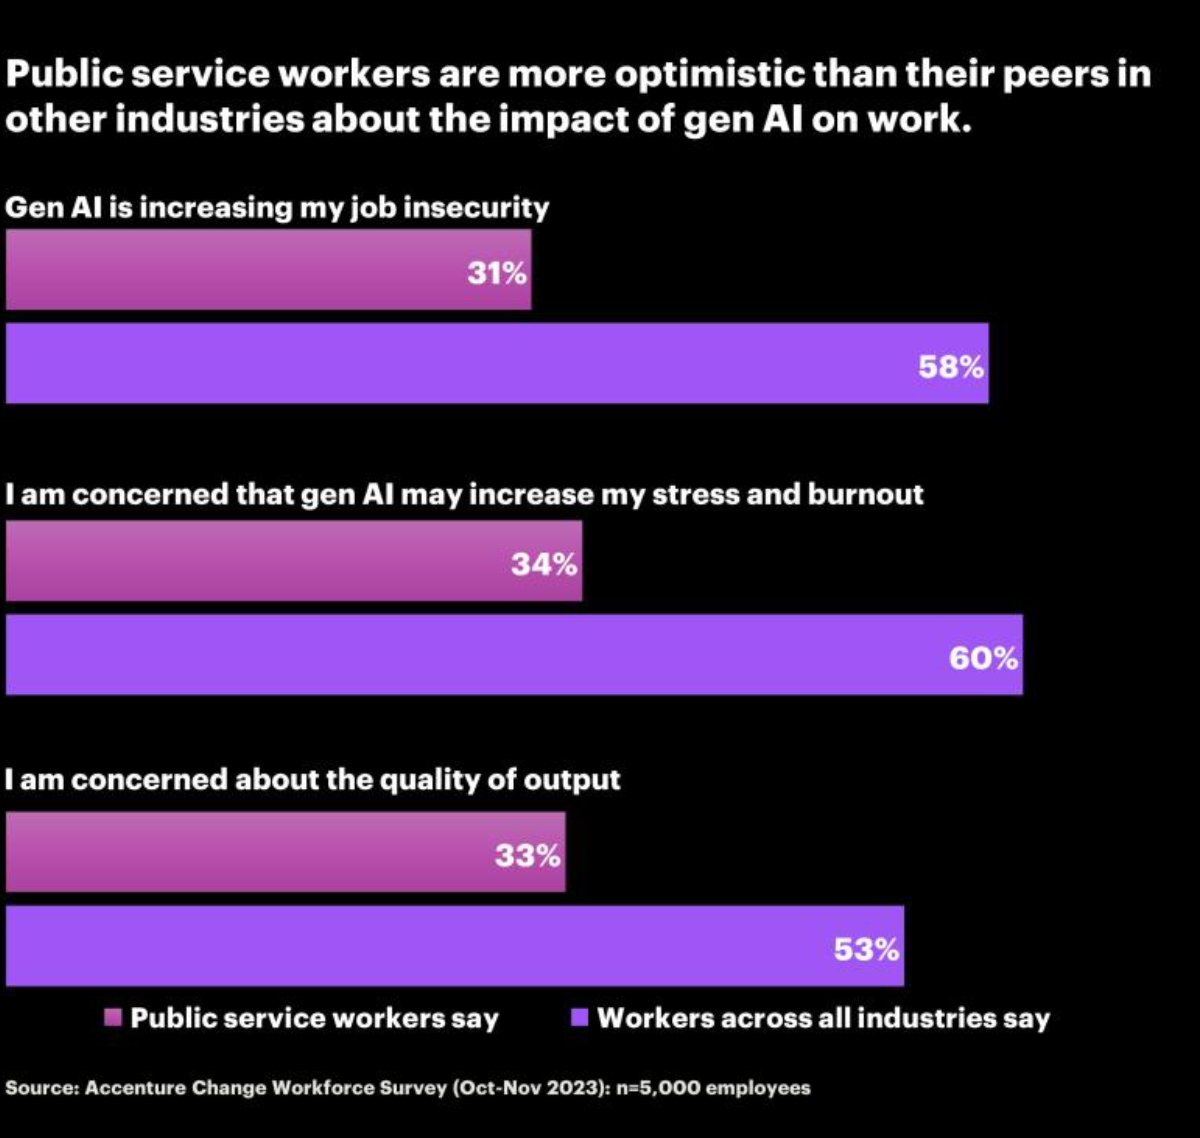 Public service workers are more optimistic than their peers in other industries about the impact of gen AI on work